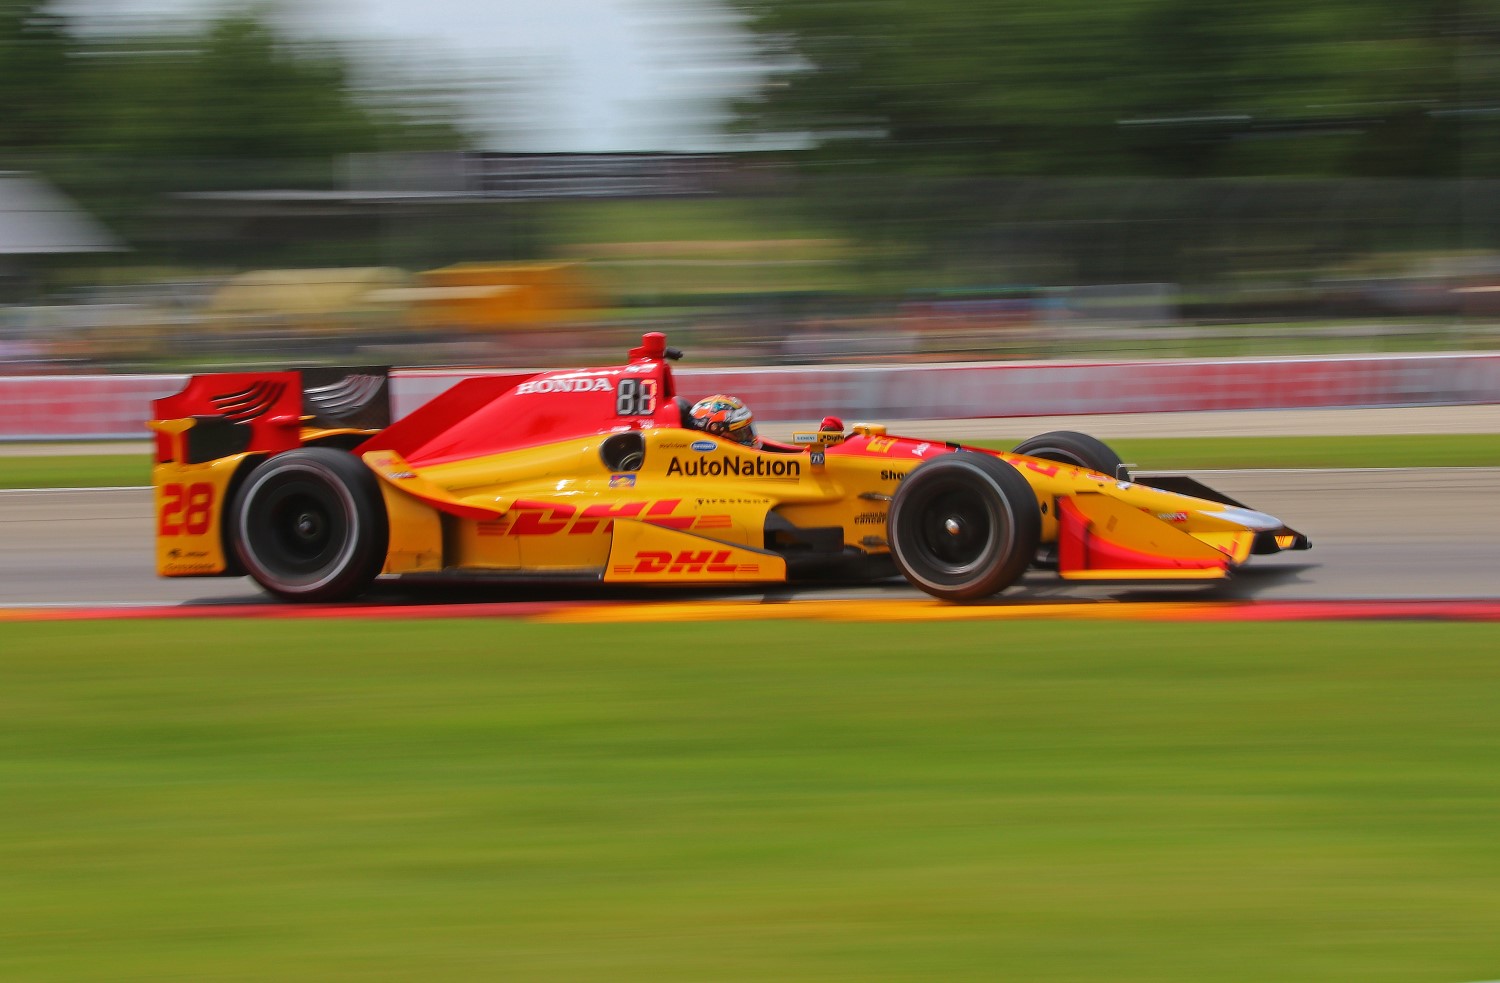 IndyCar will be largely invisible again for the marjority of the races, which are on NBCSN